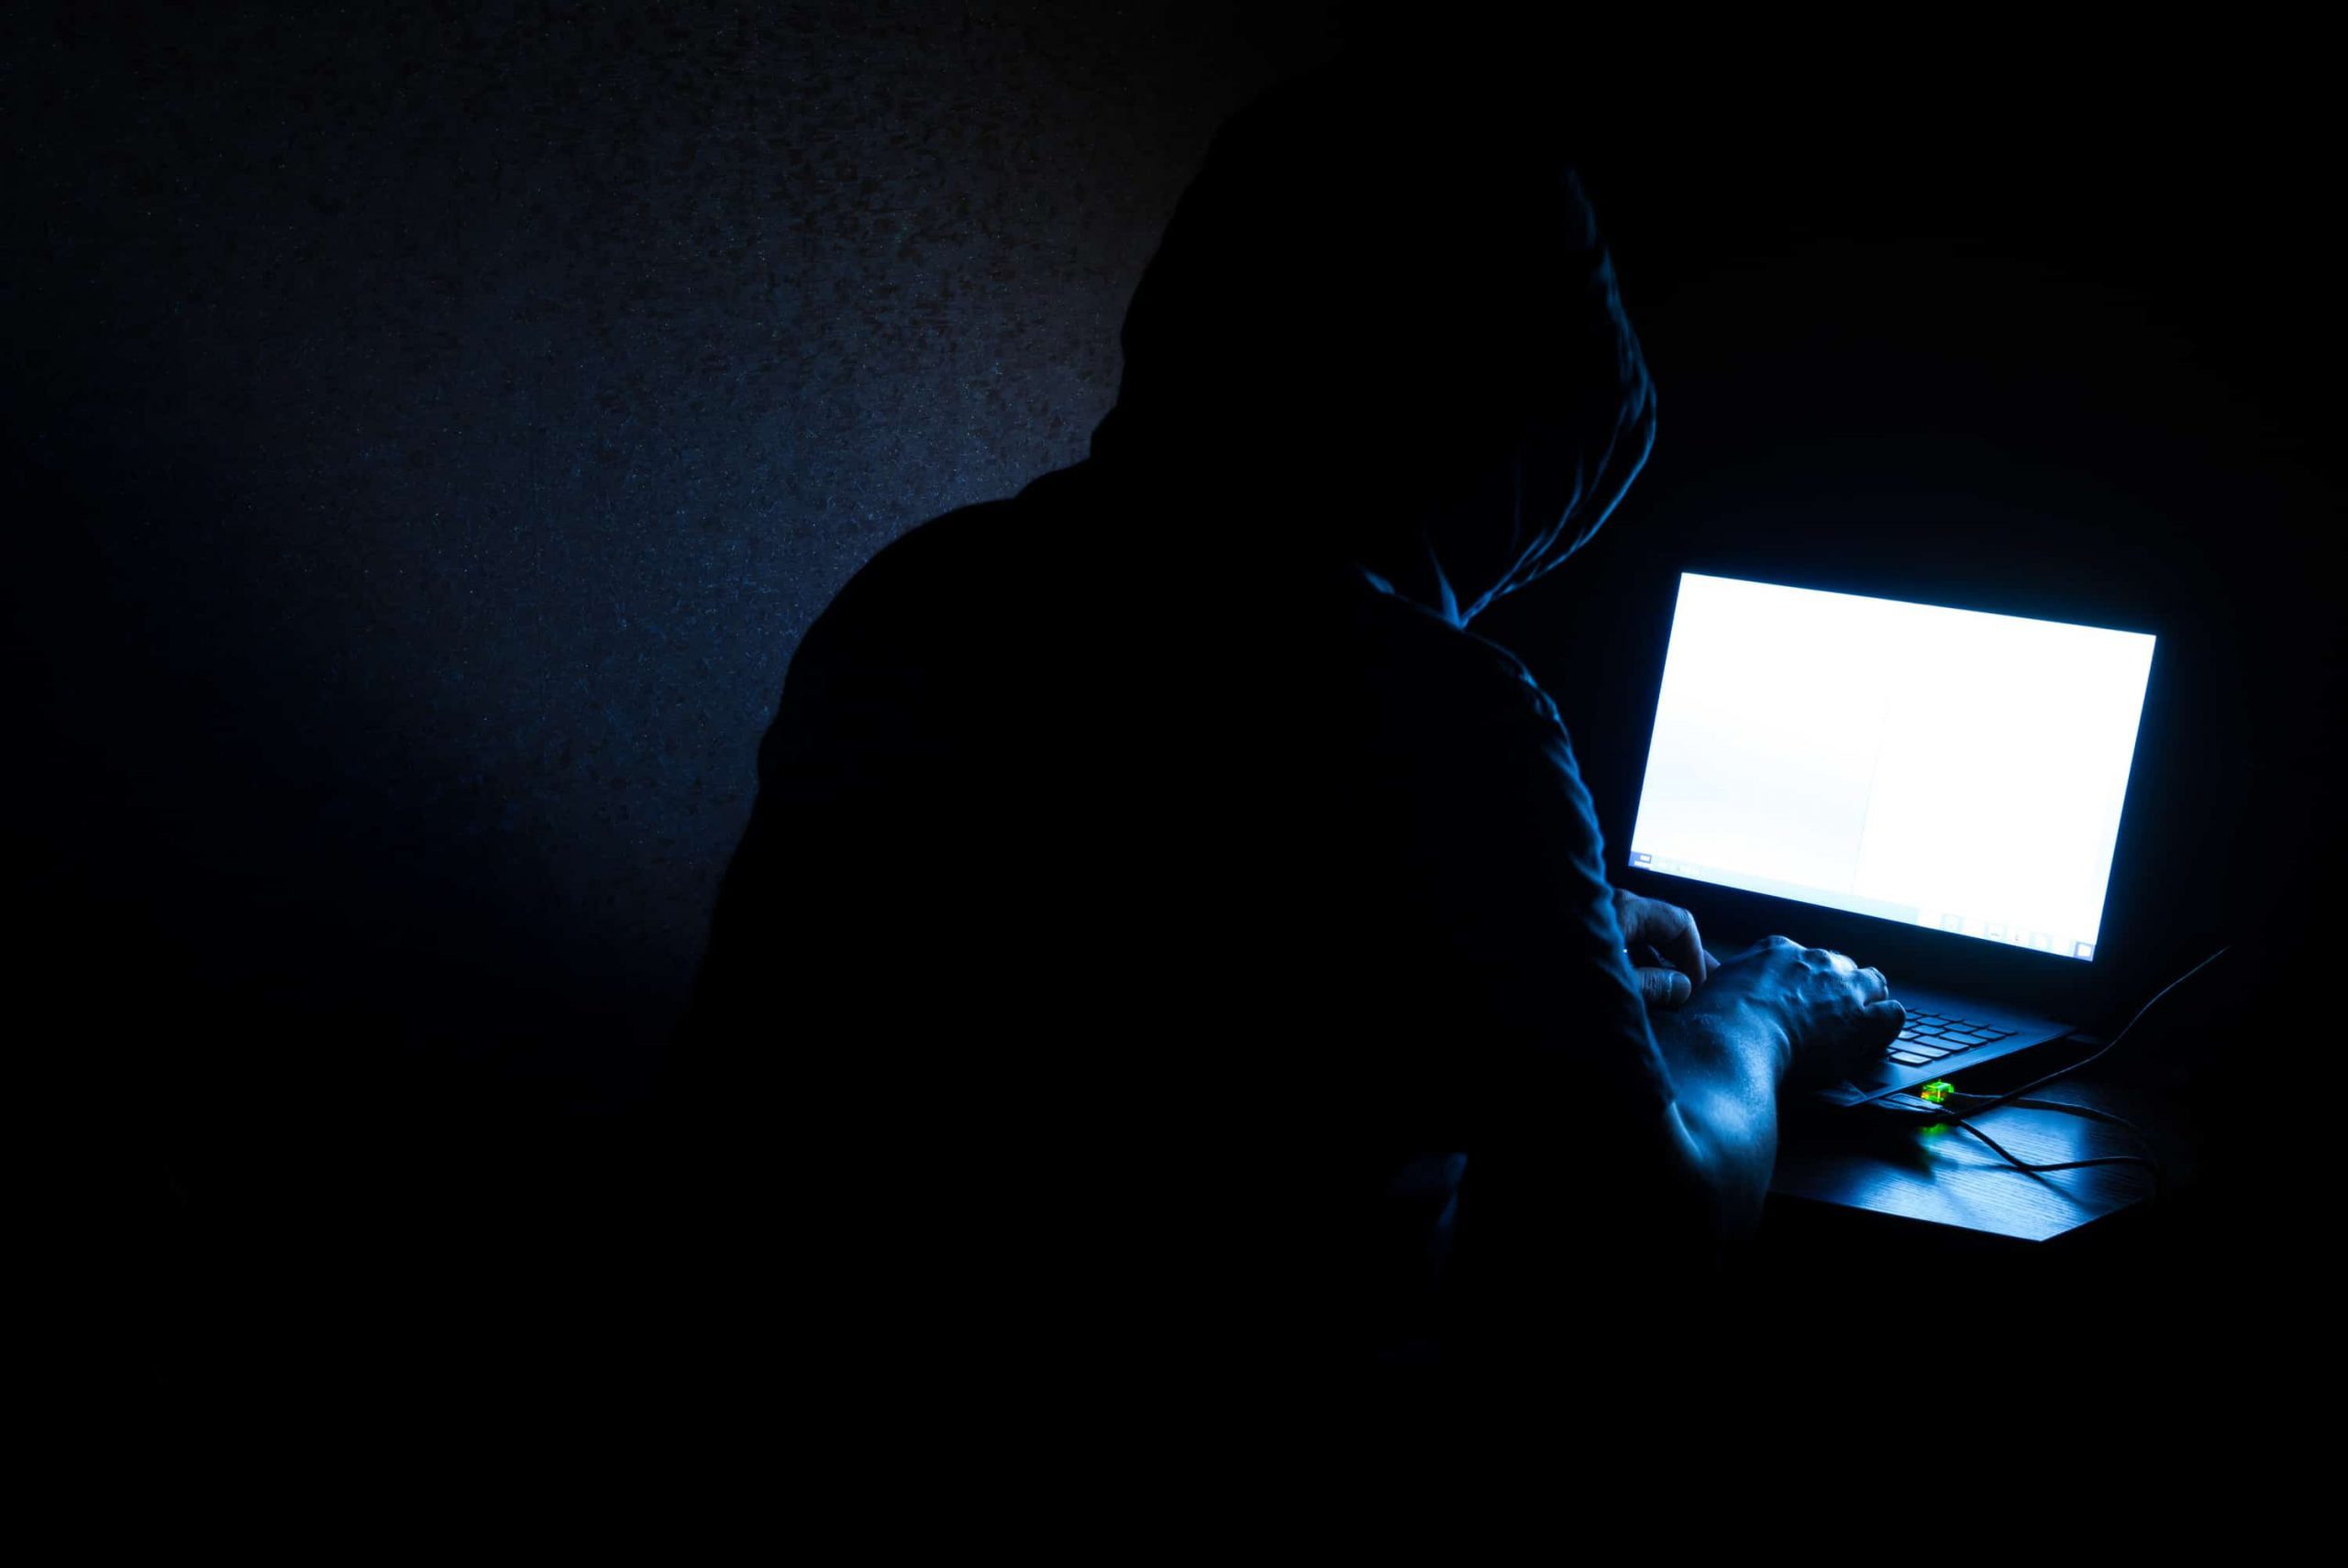 How to navigate the dark web securely